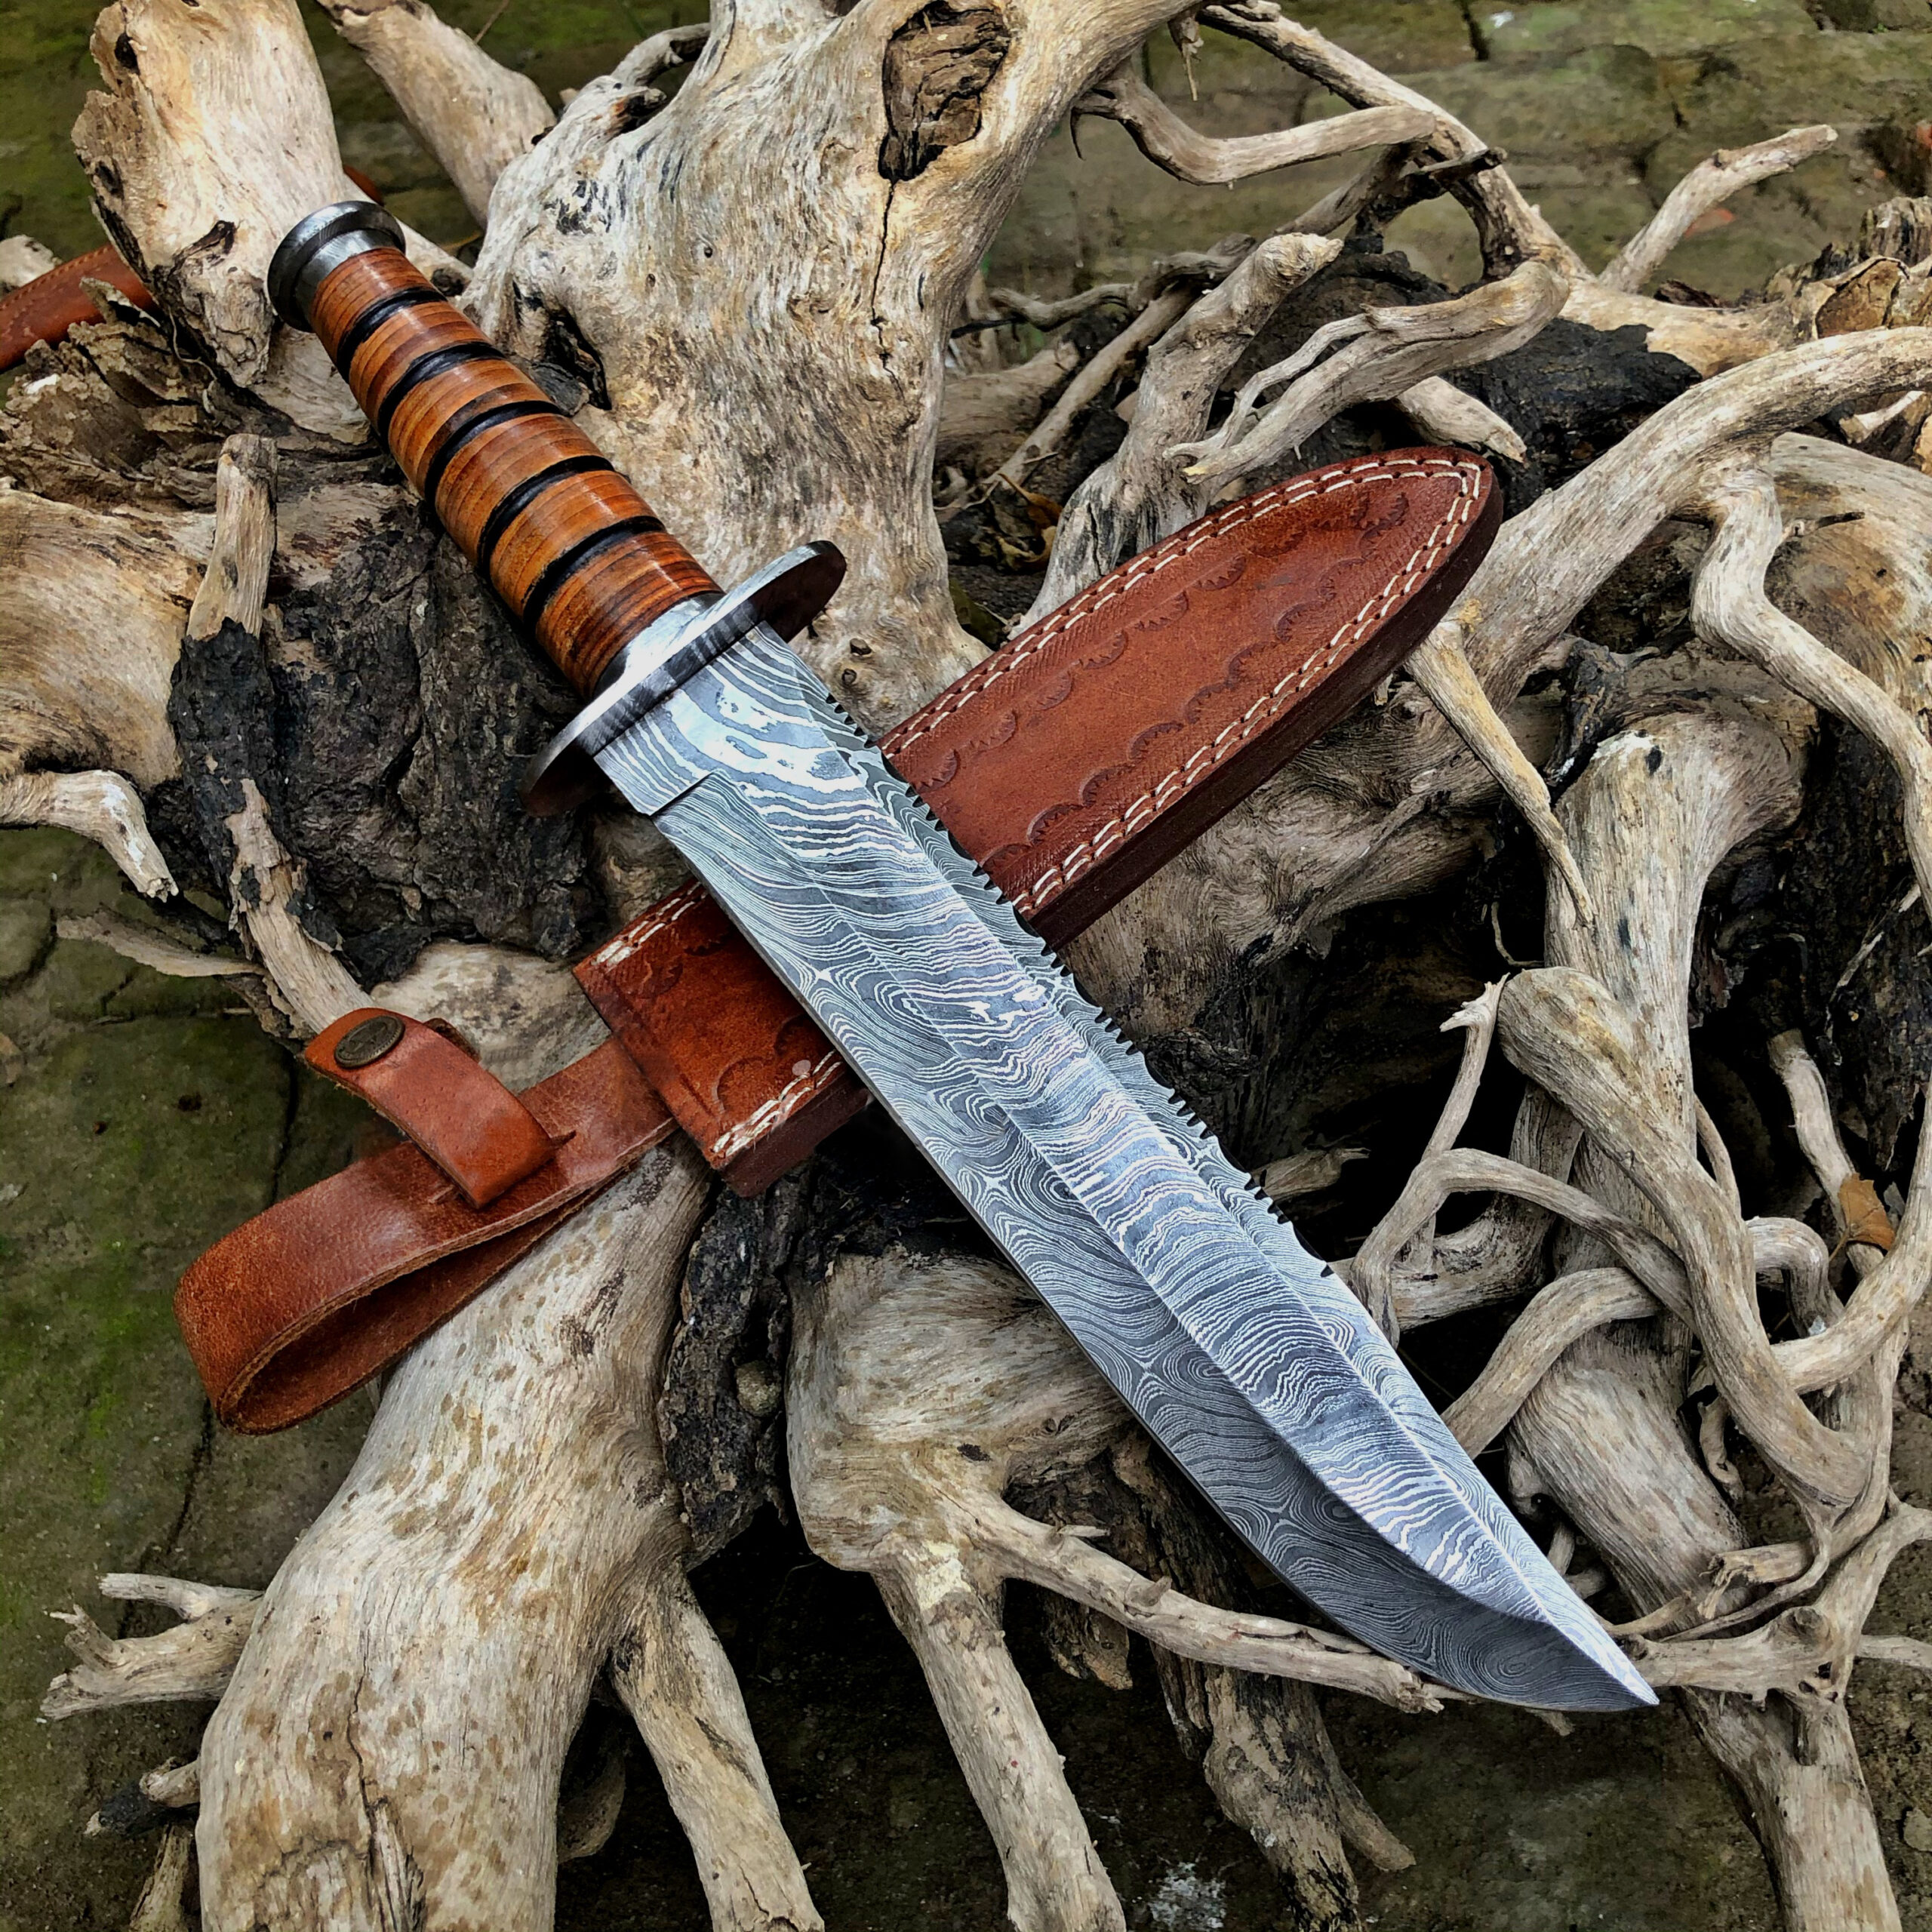 [Linked Image from esaleknives.com]